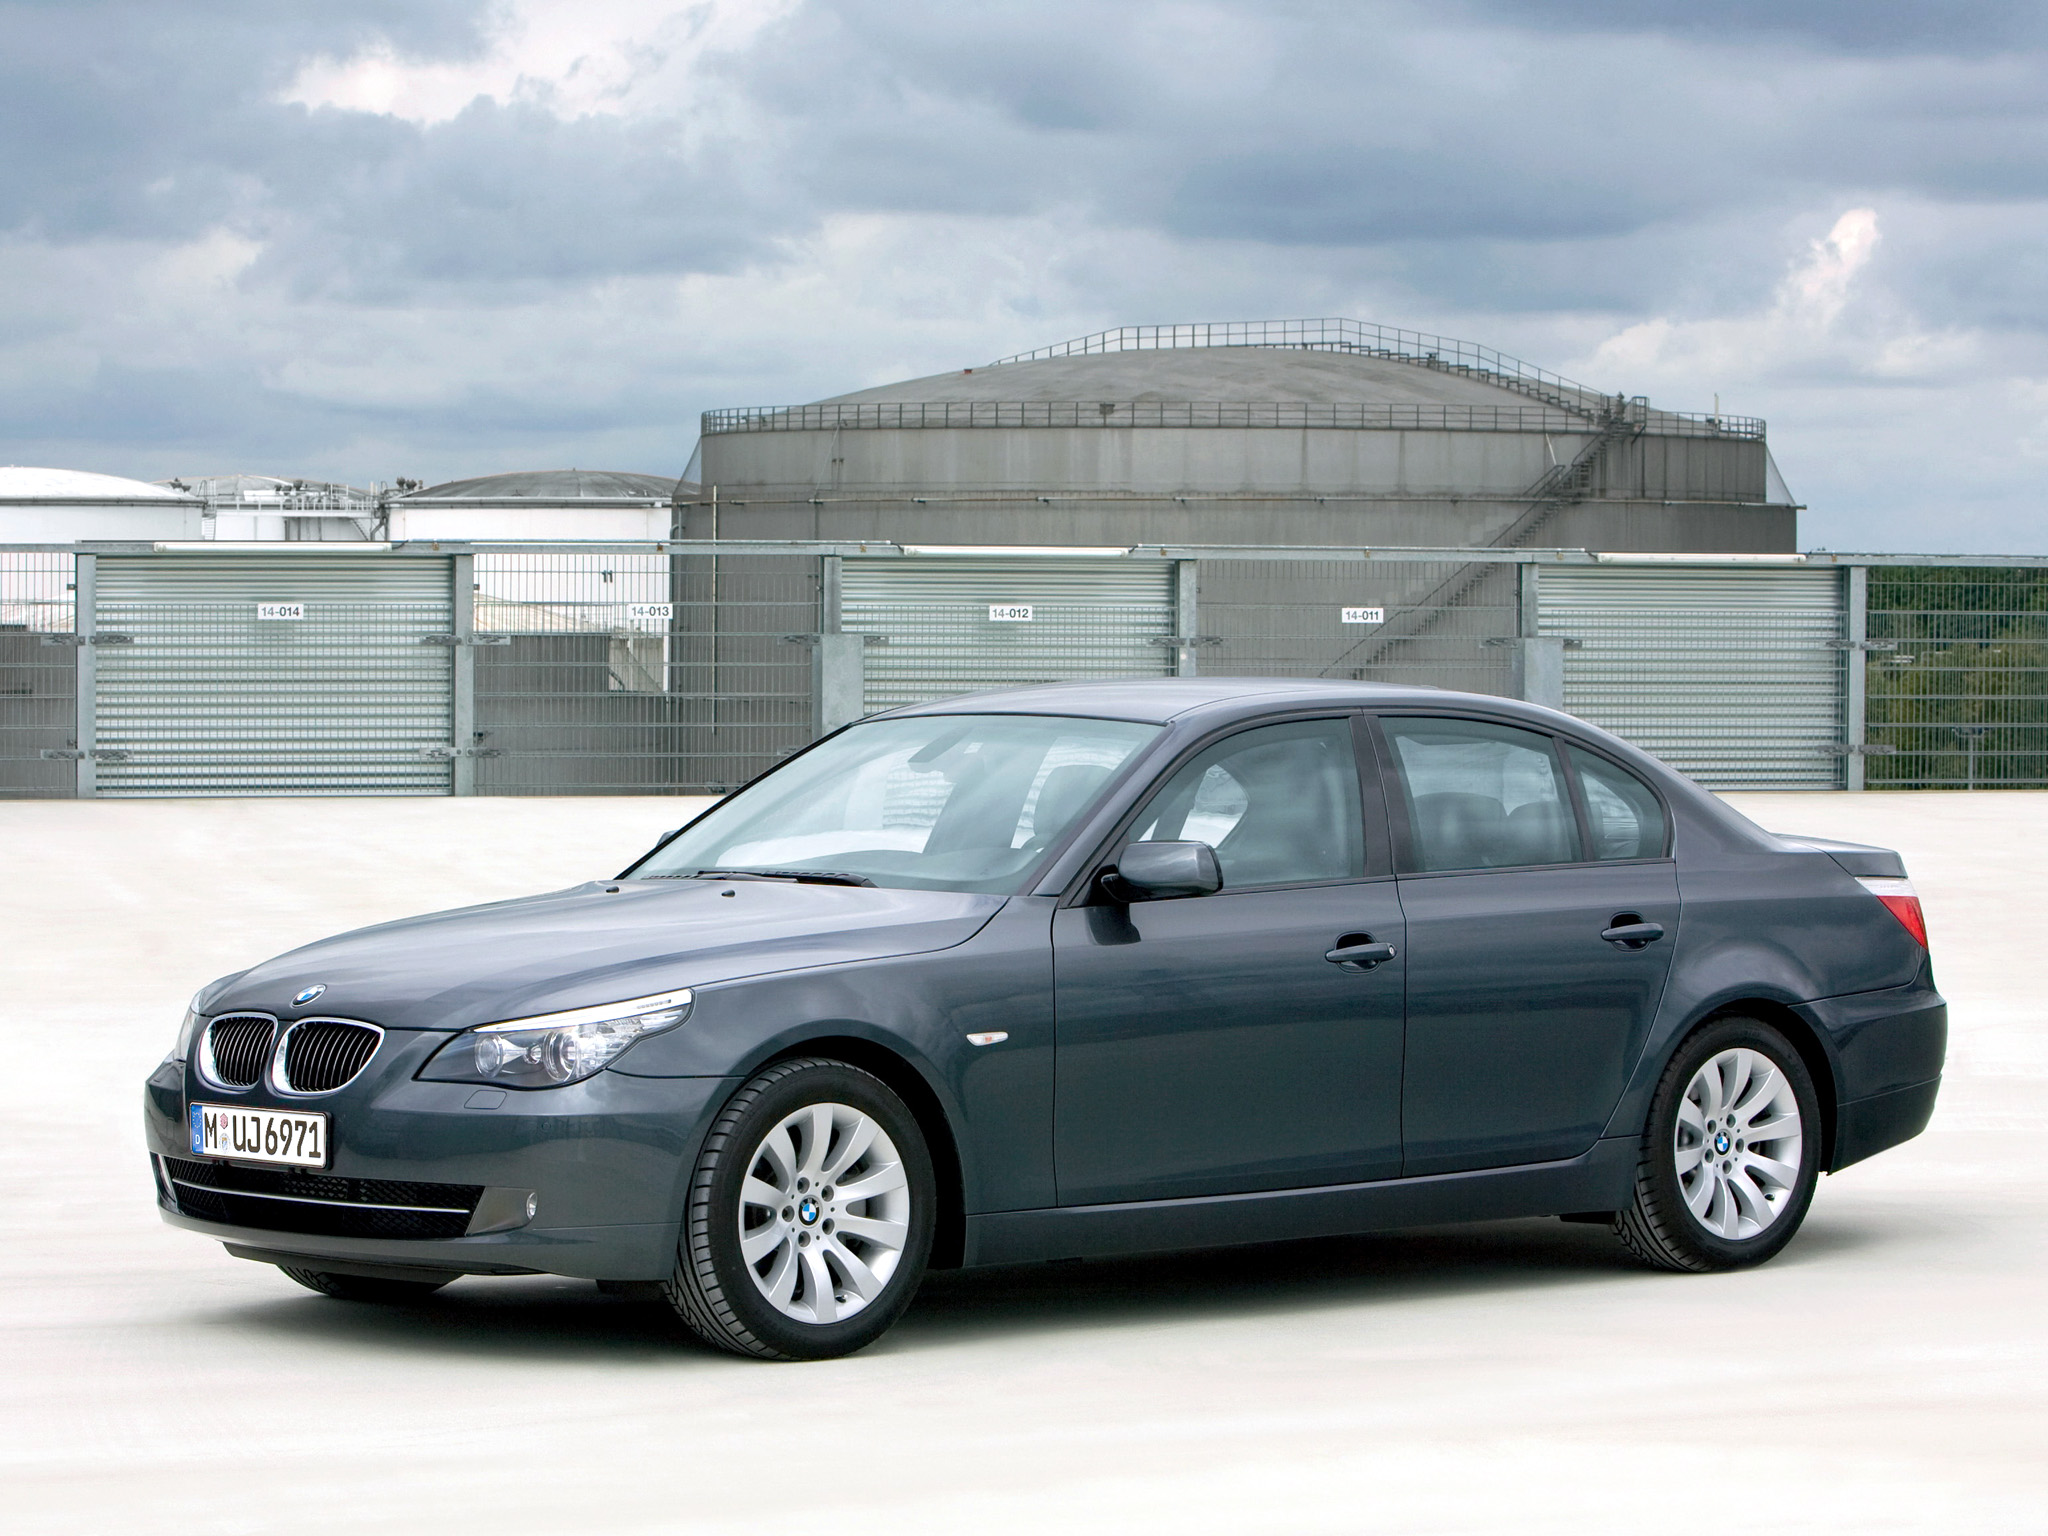 2008, Armored, Bmw, 5 series, Security, E60 Wallpaper